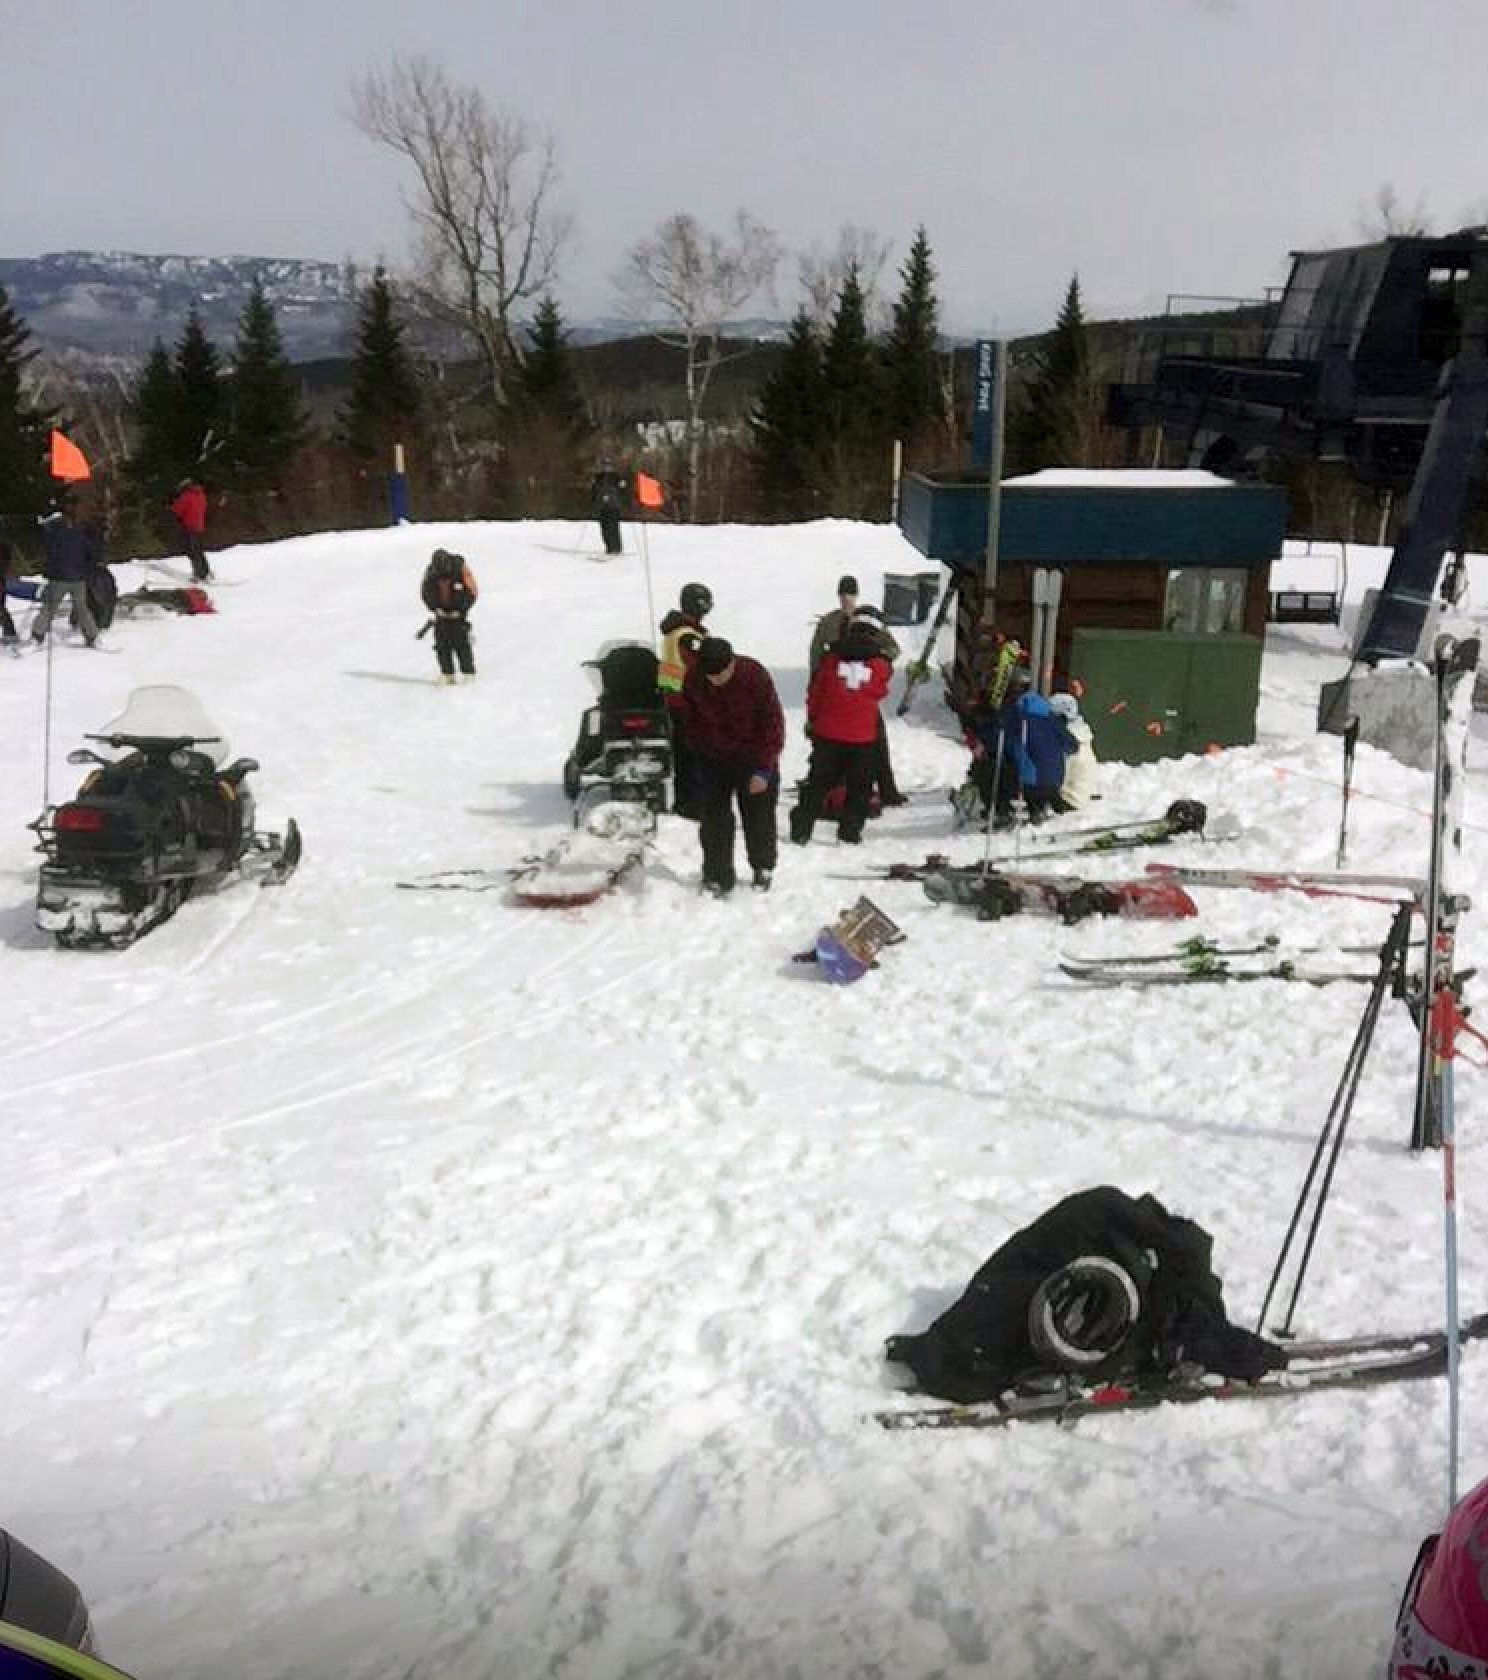 Brake design flaw contributed to Maine chairlift malfunction - The ...